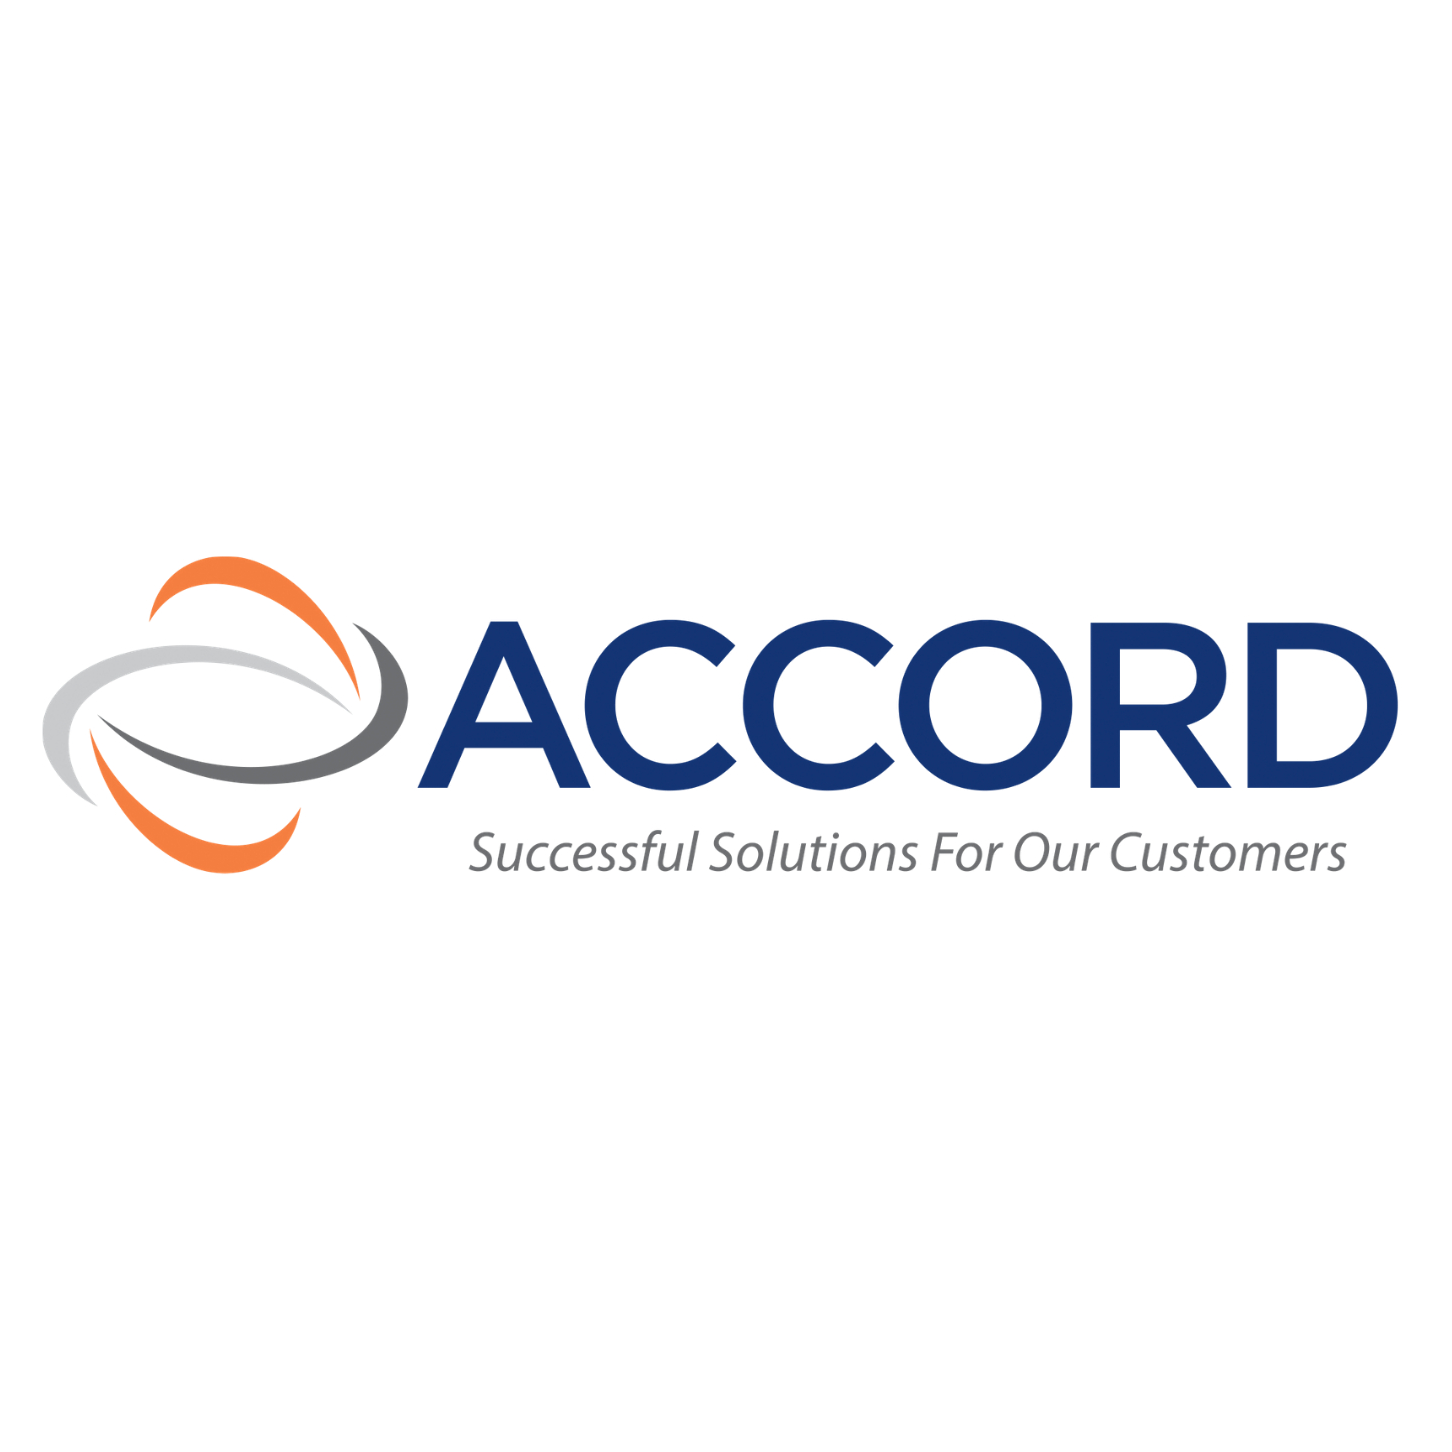 Accord Property Services